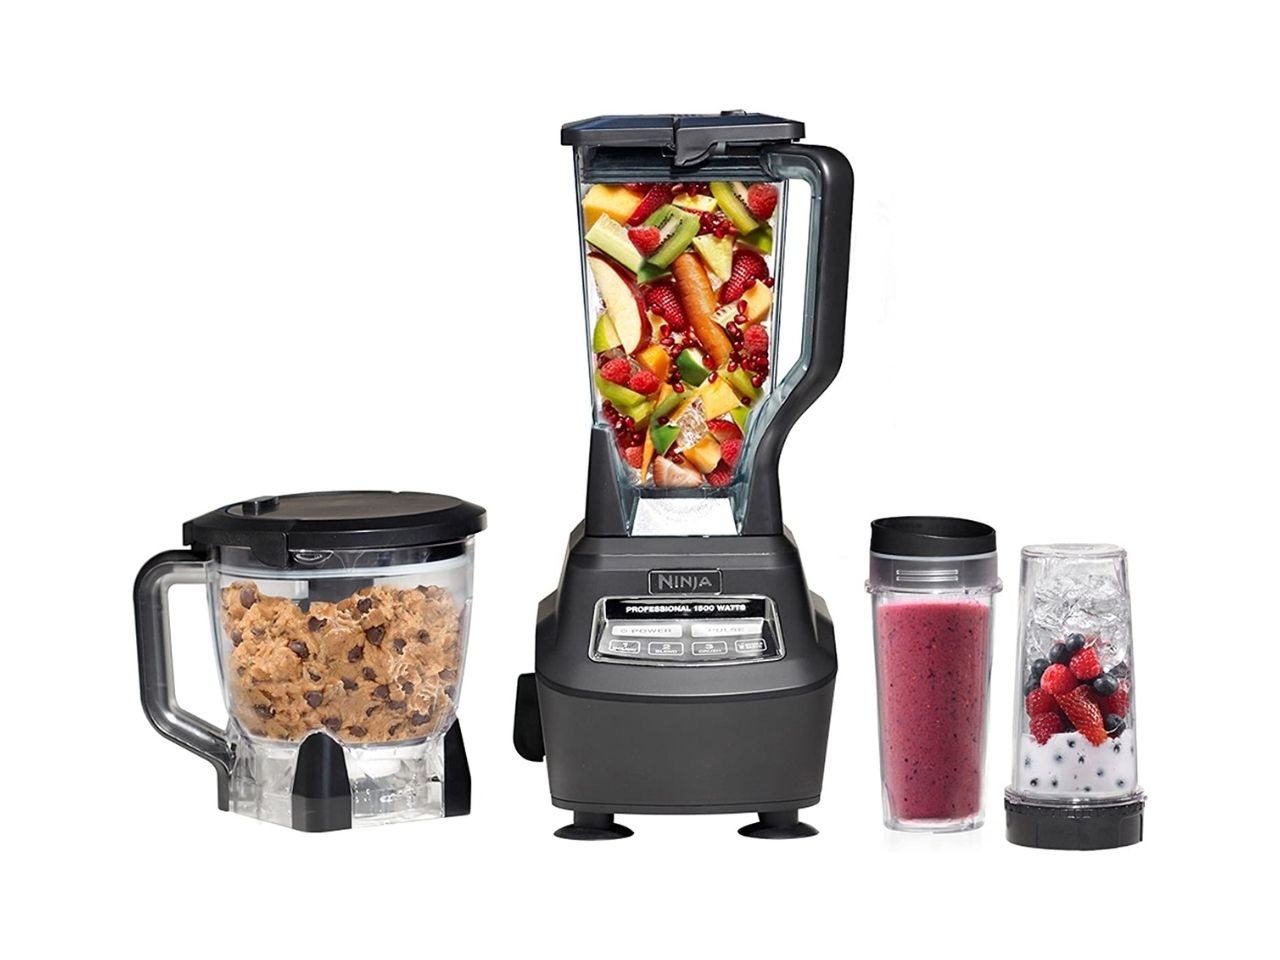 Practically brand new ninja blender set for $15 at a goodwill